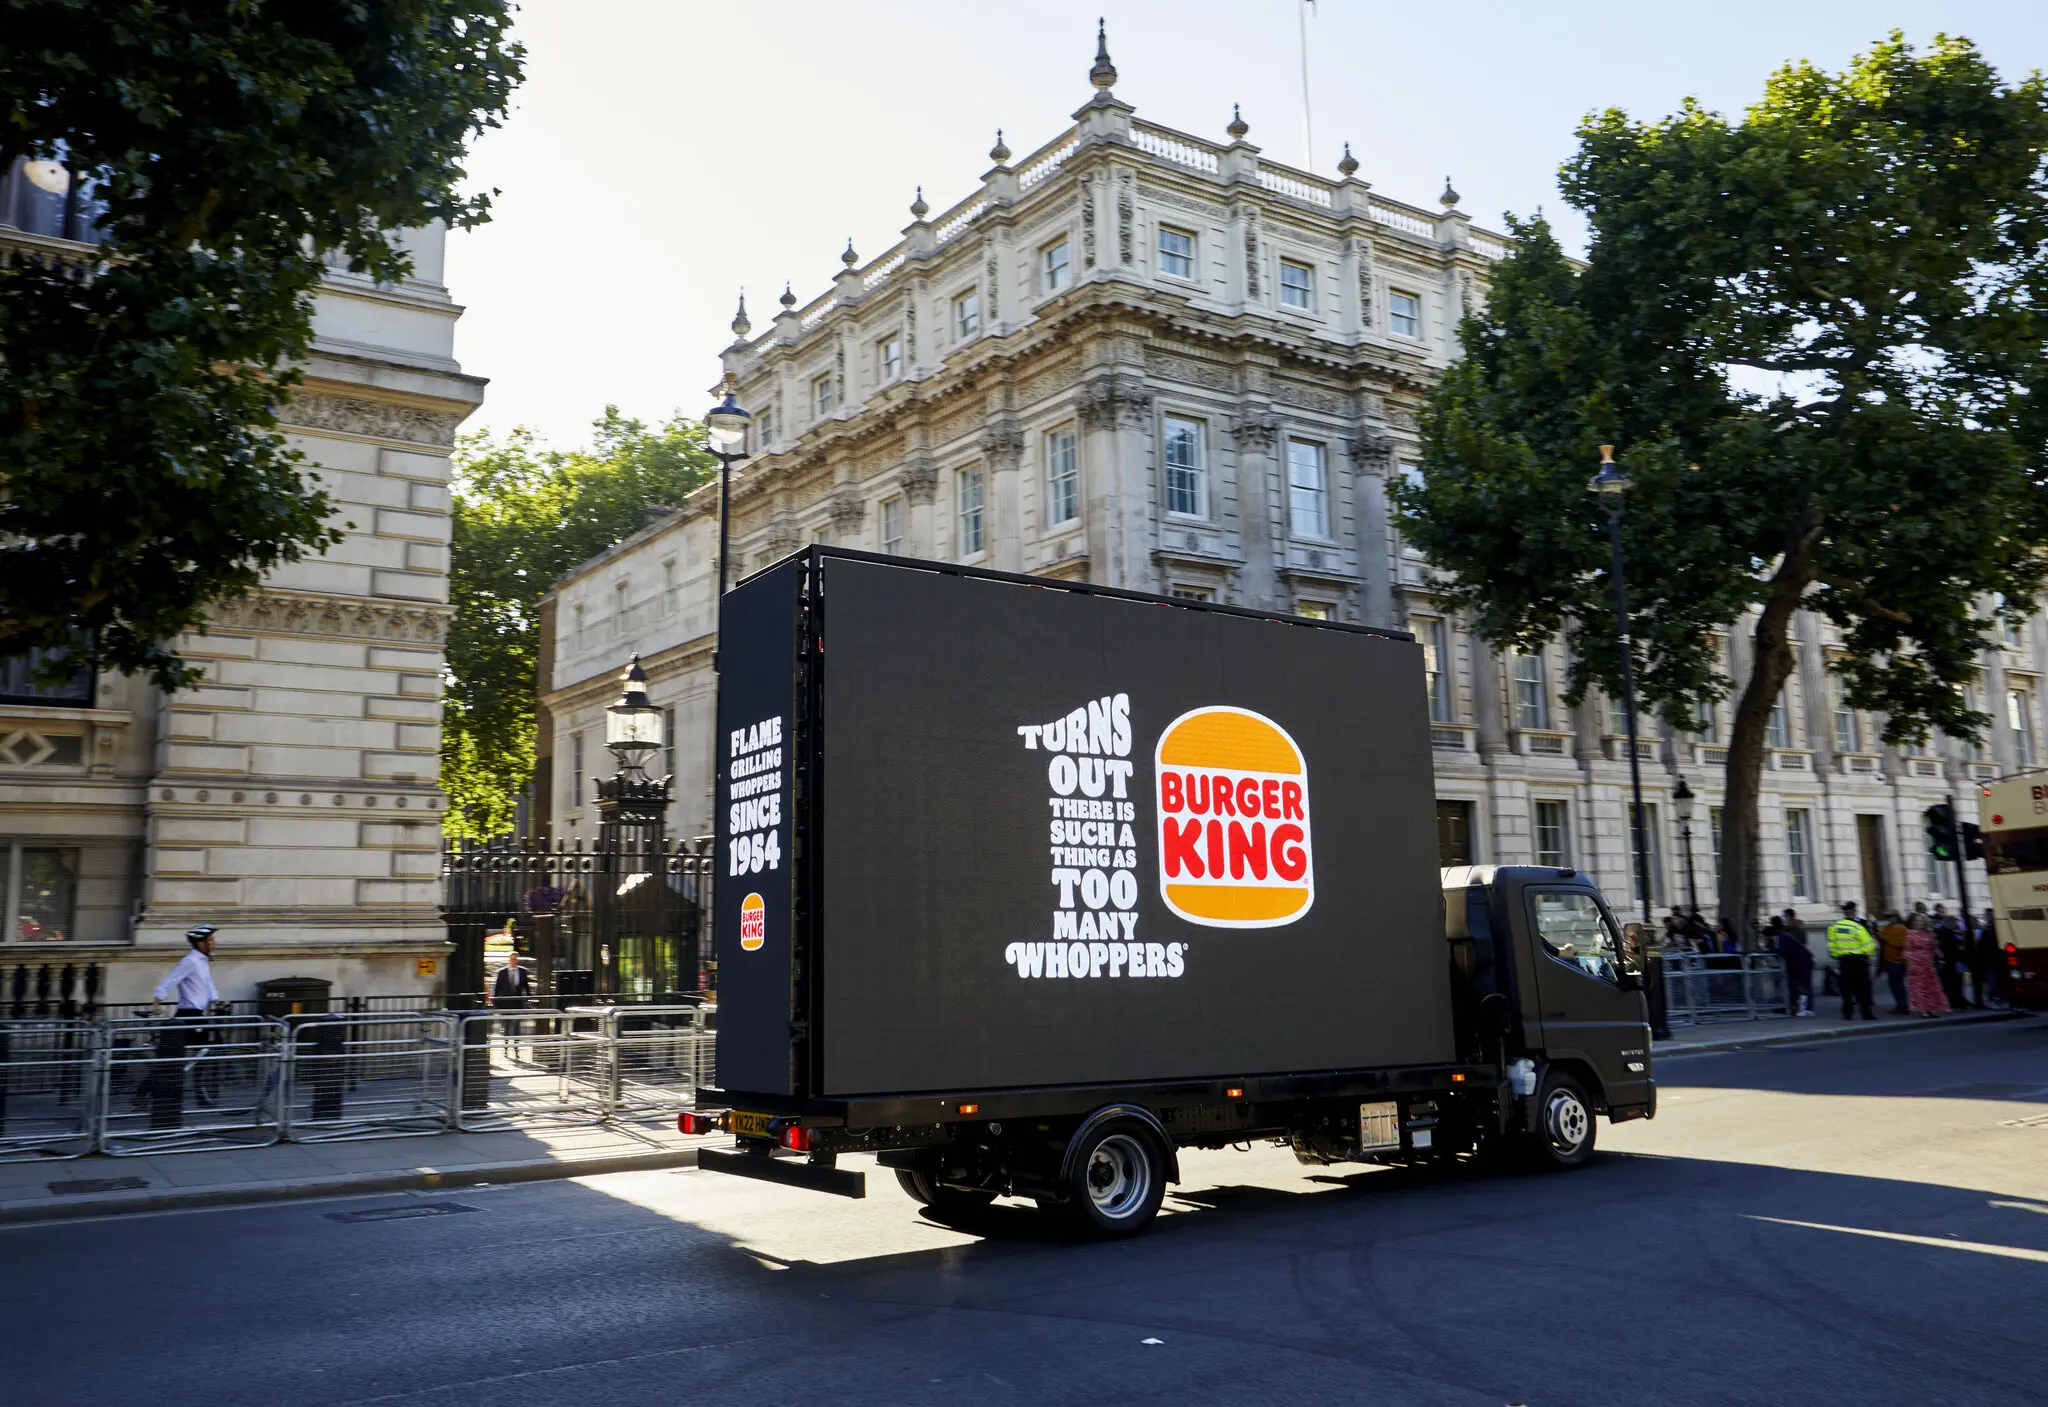 Truck Advertising, Burger King, Turns out there is such a thing as TOO MANY WHOOPERS